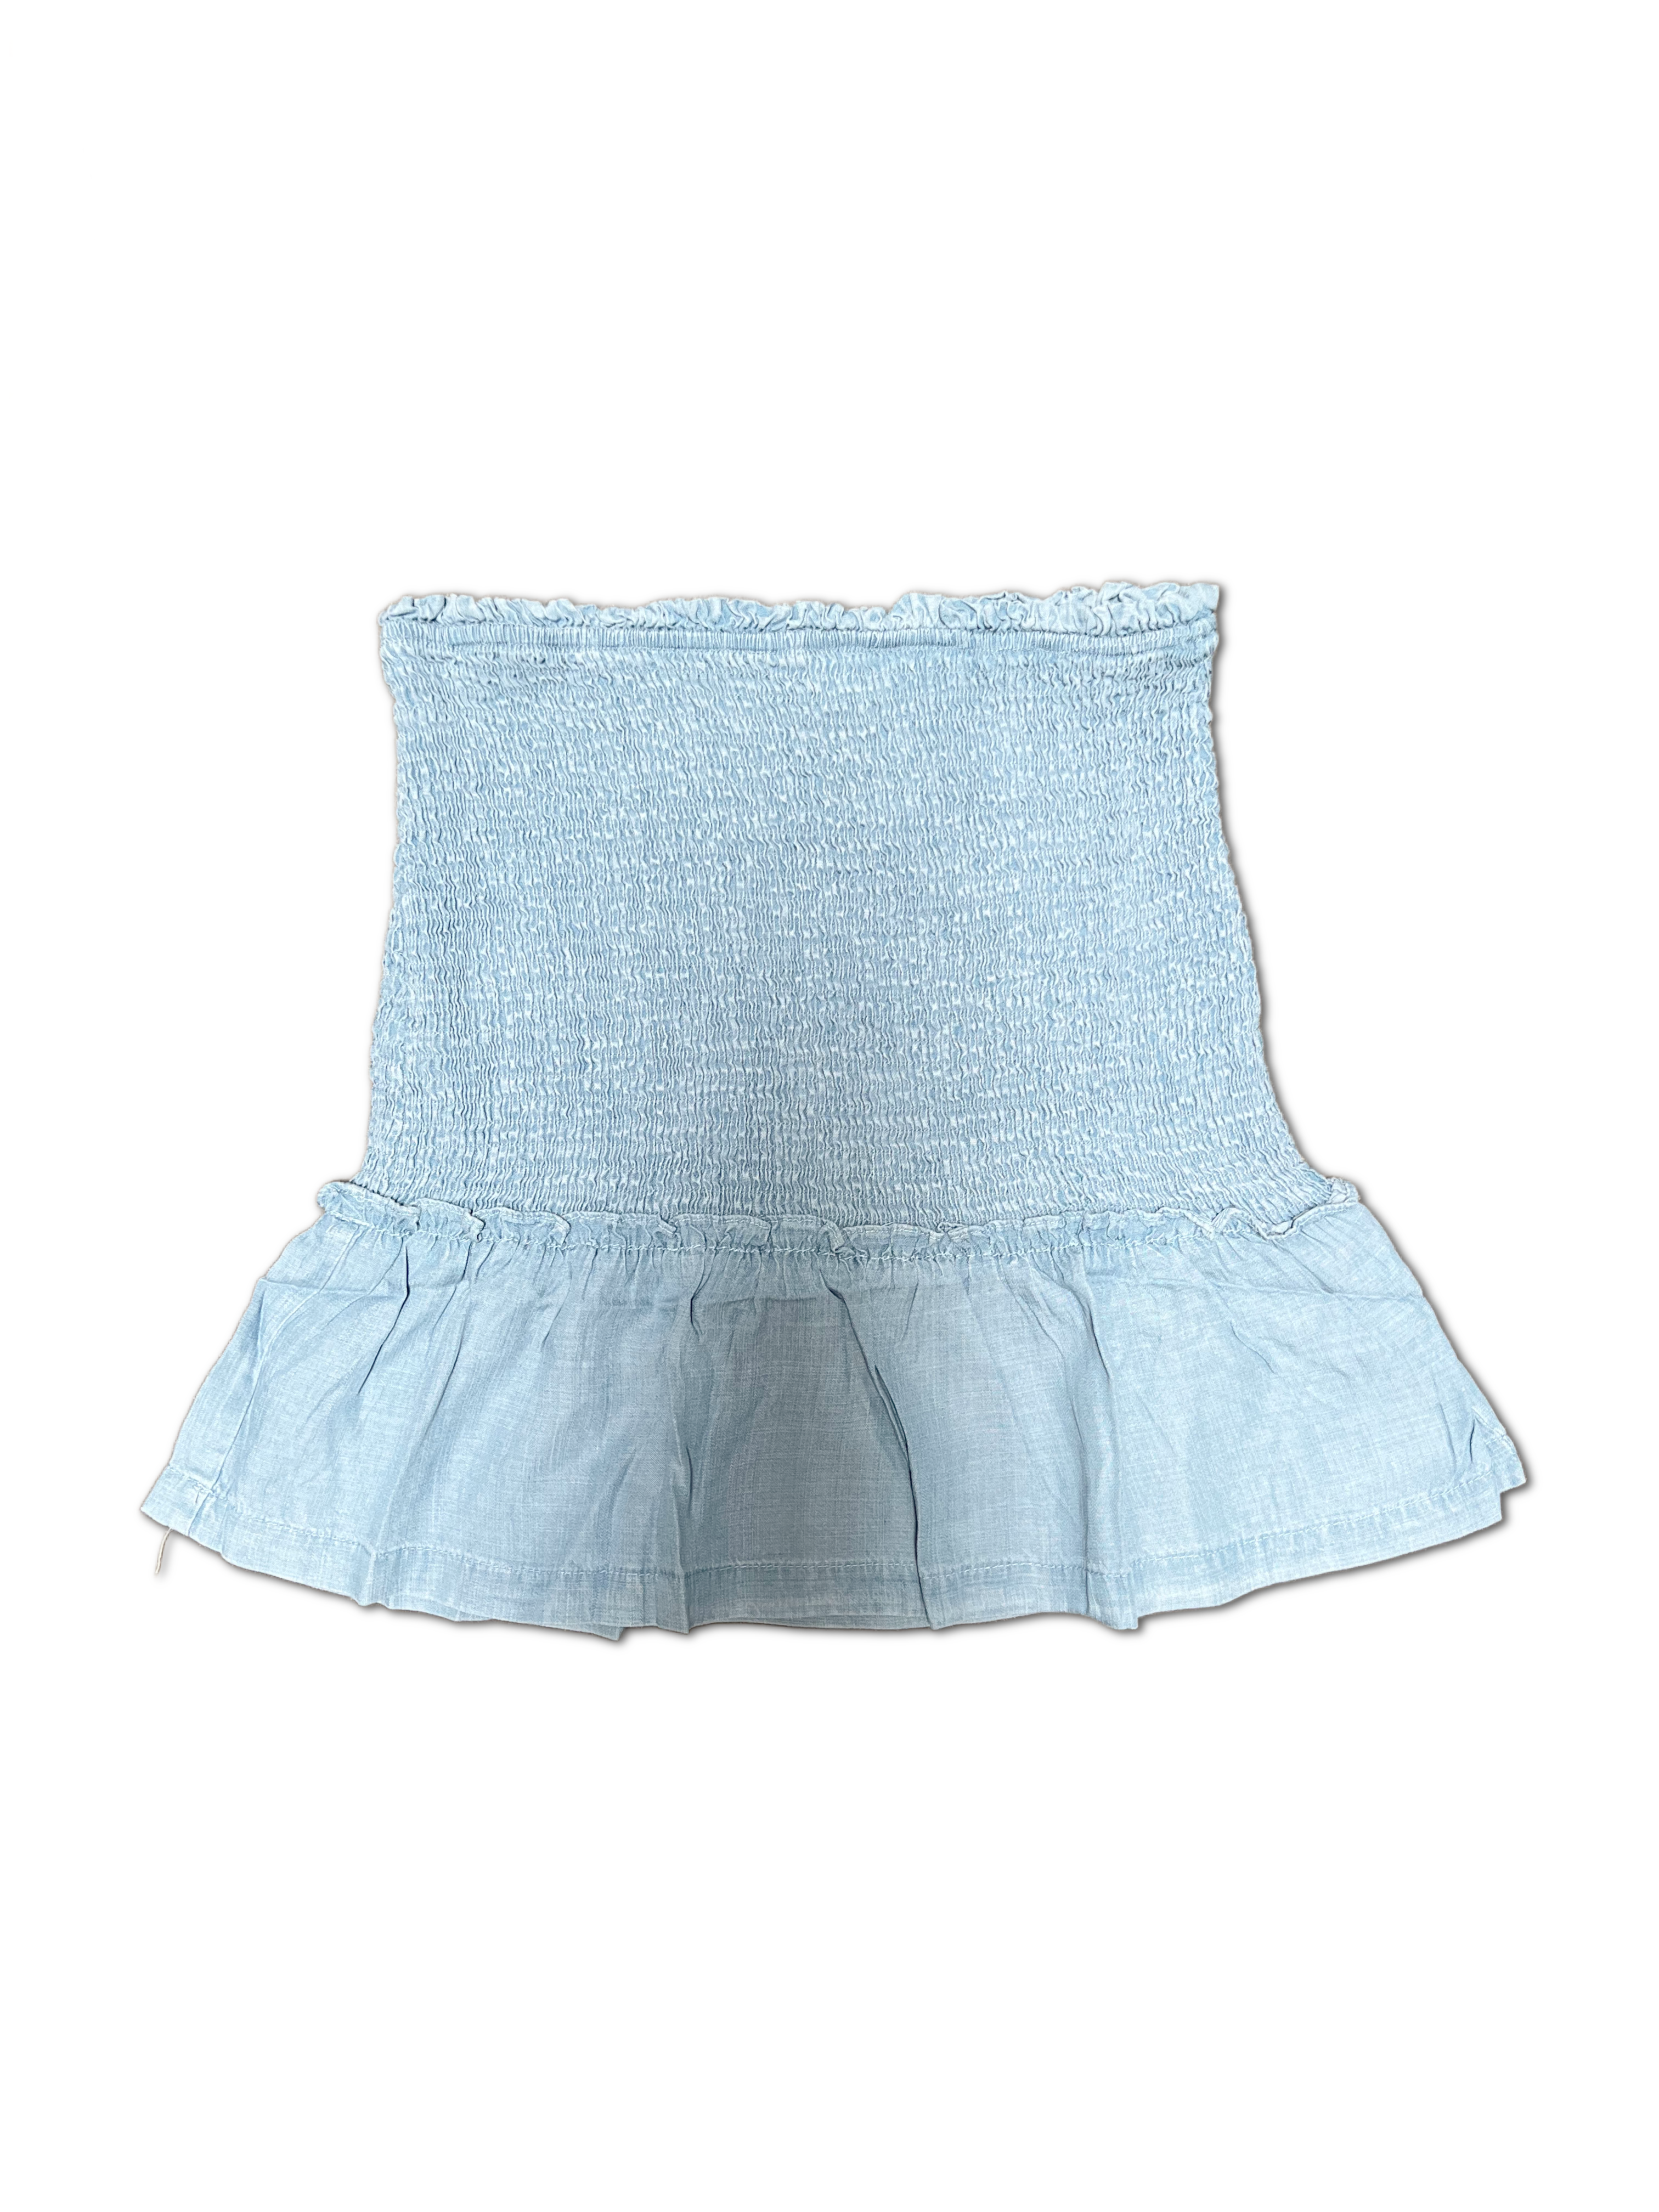 Chambray All Day - Smocked Skirt